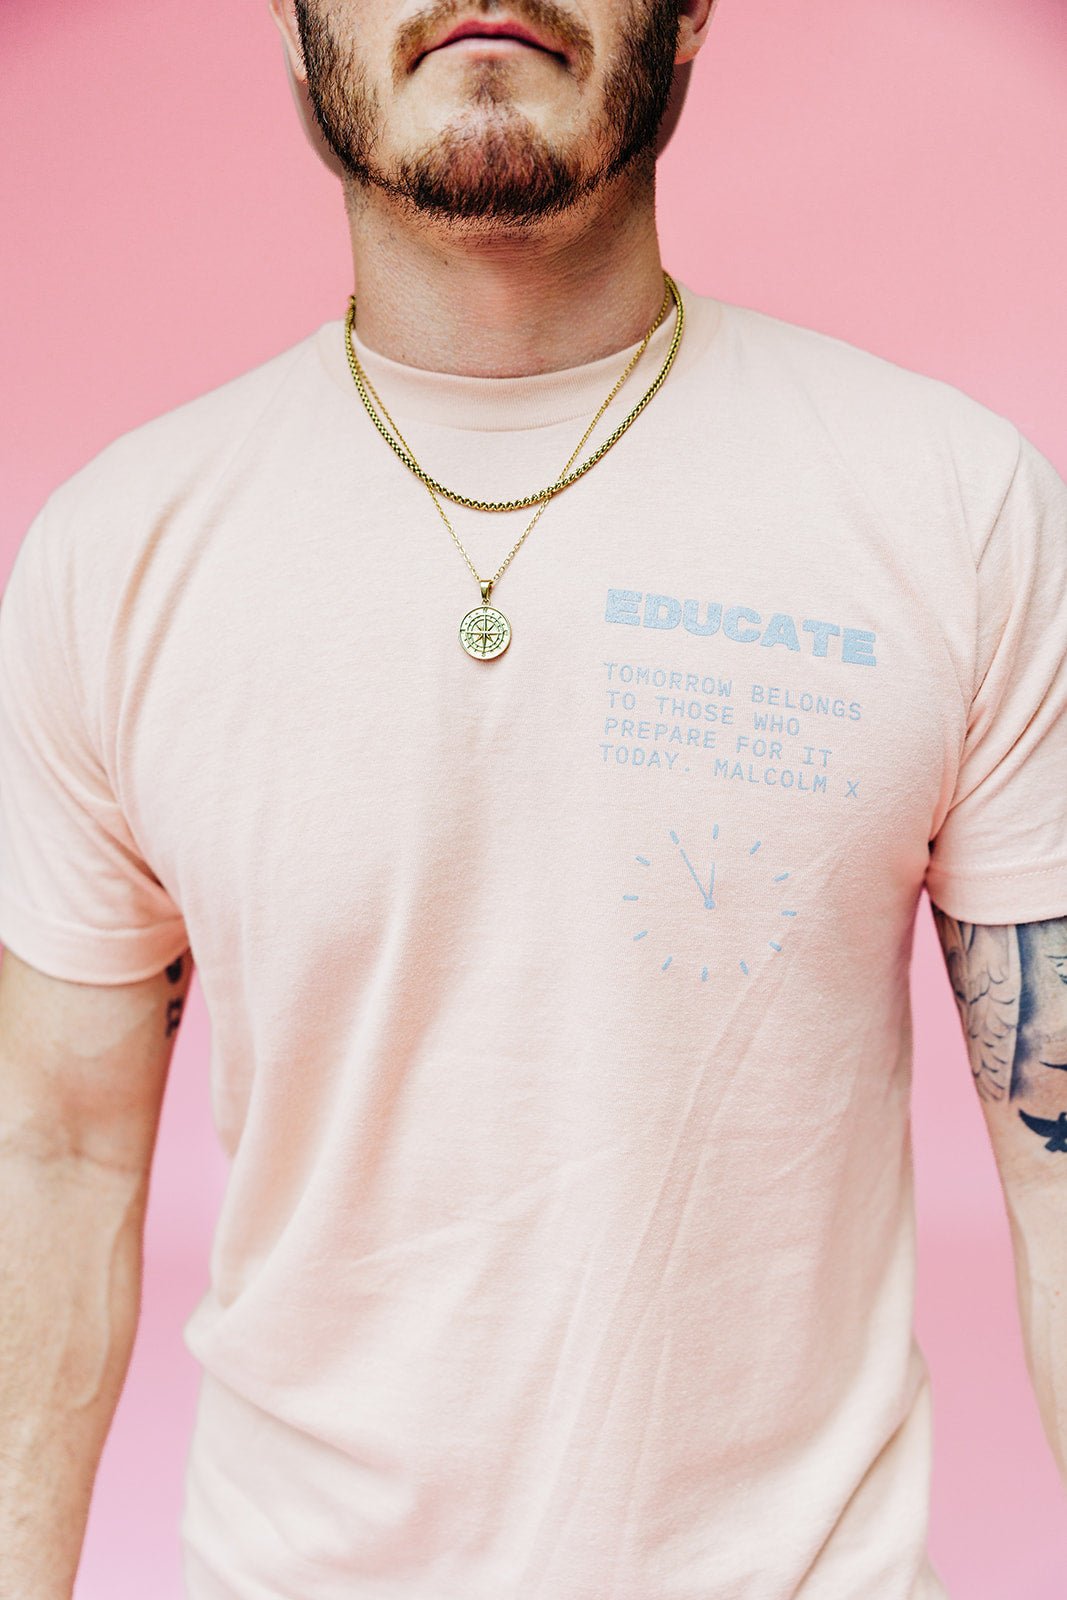 Educate Malcolm X Tee - GYTO Collective - Get Your Teach On